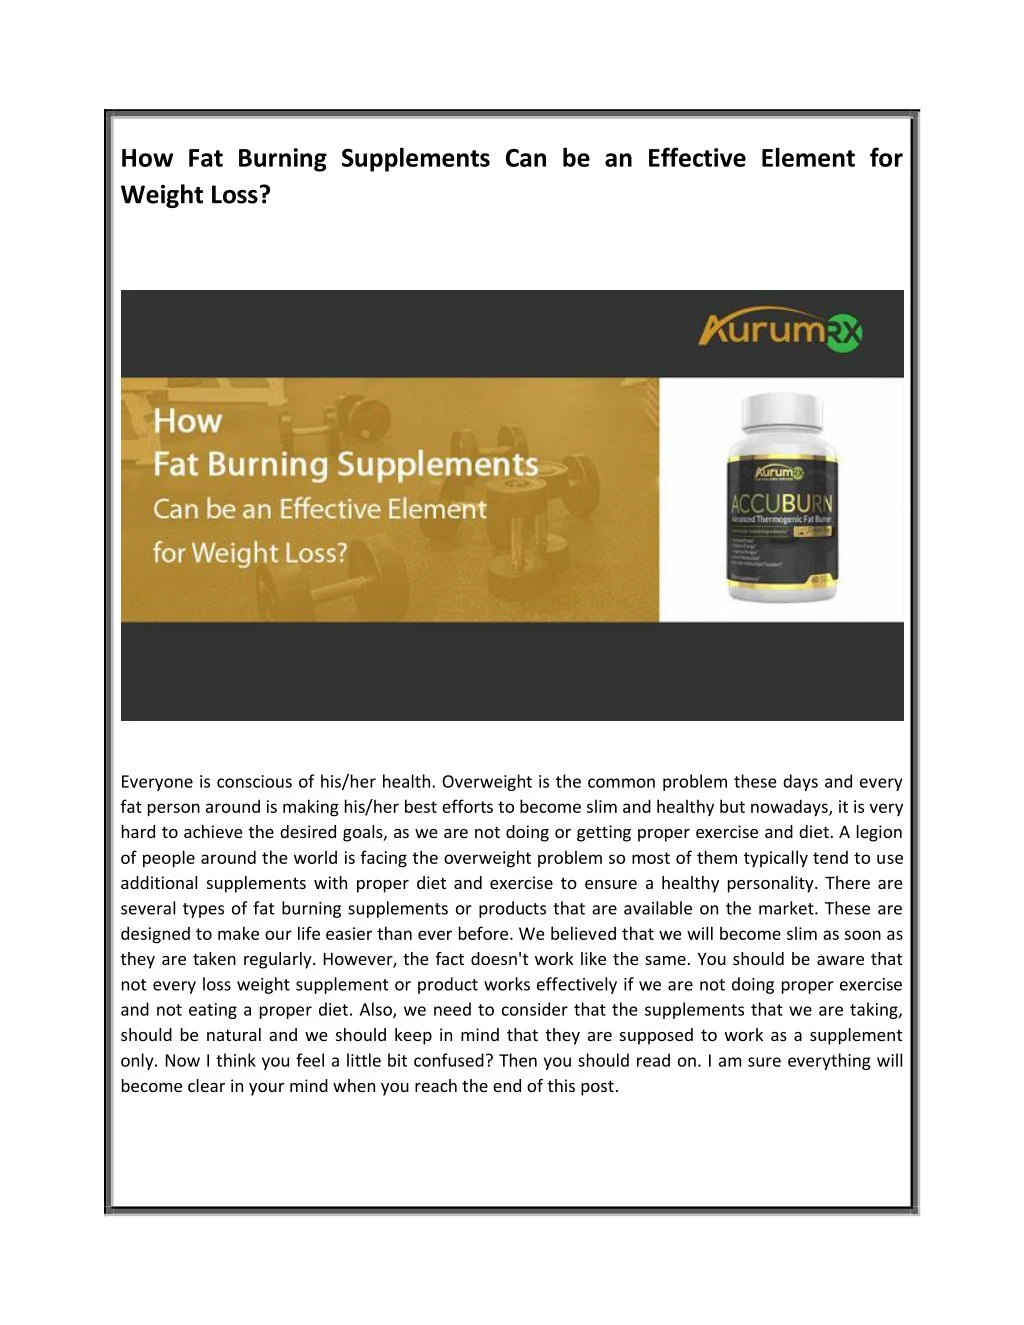 how fat burning supplements can be an effective